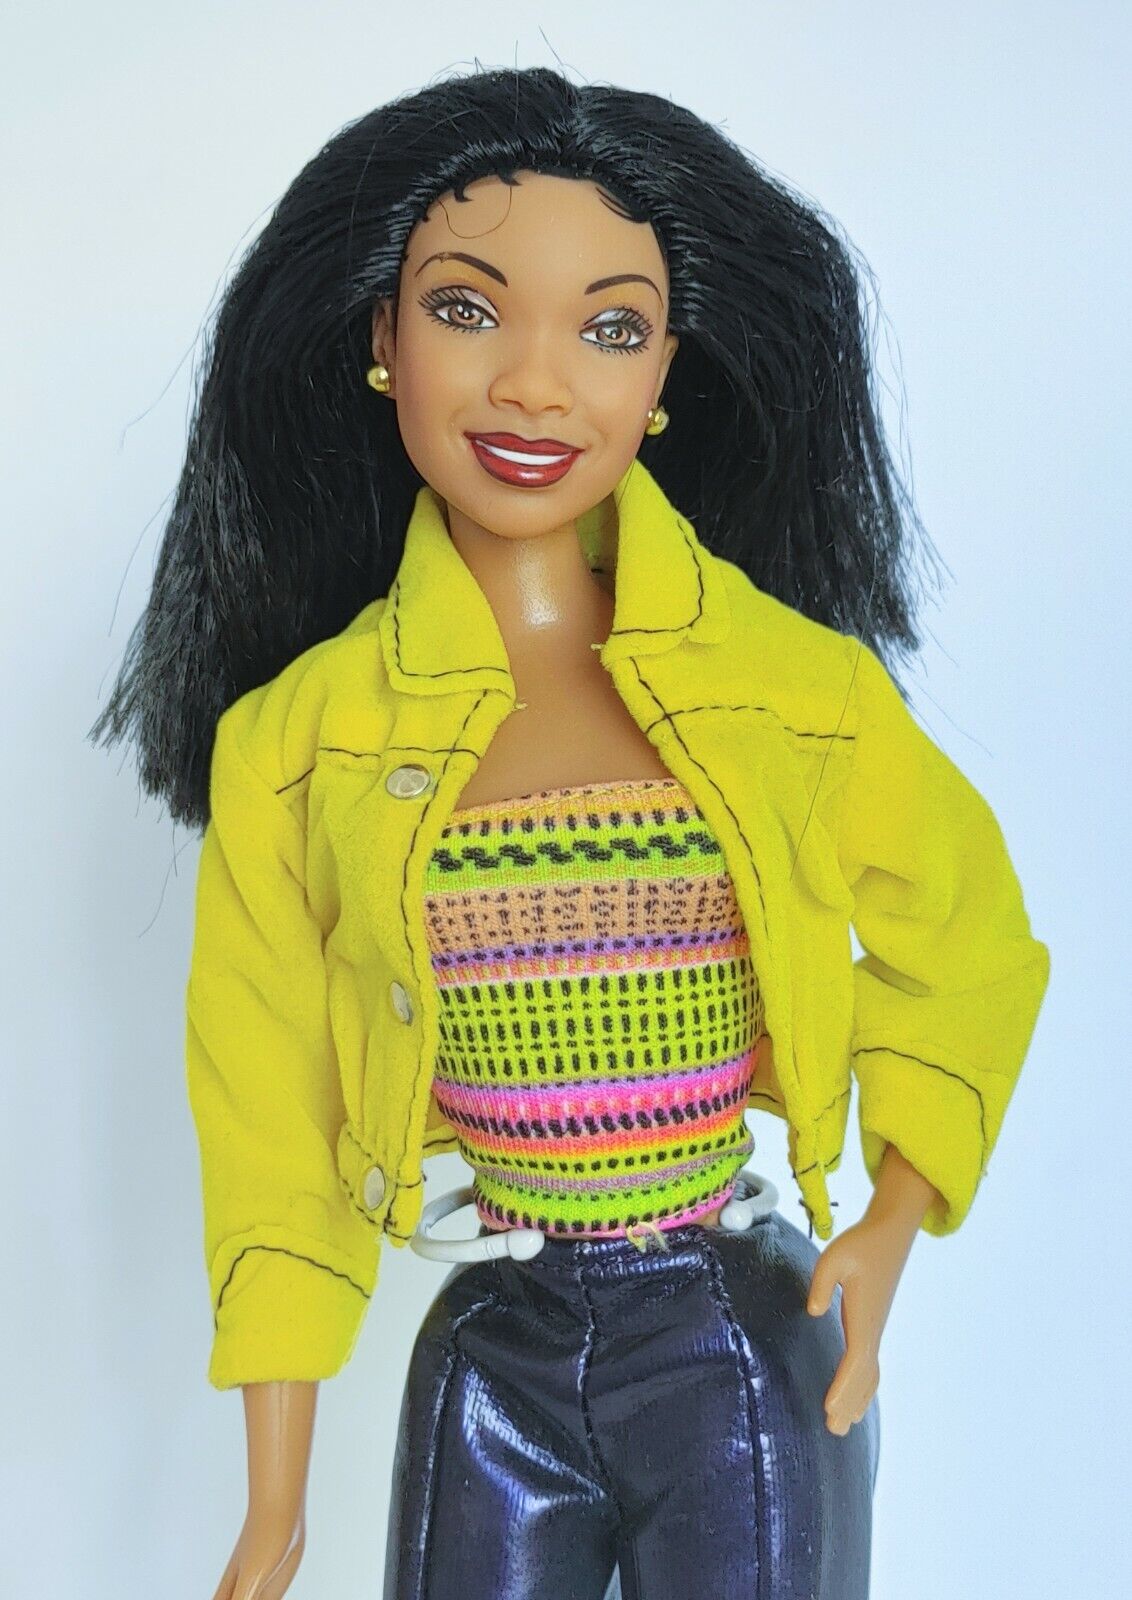 Halle Bailey Has Her Own ‘Little Mermaid’ Doll! See Other Black Women Fashioned Into Figurines